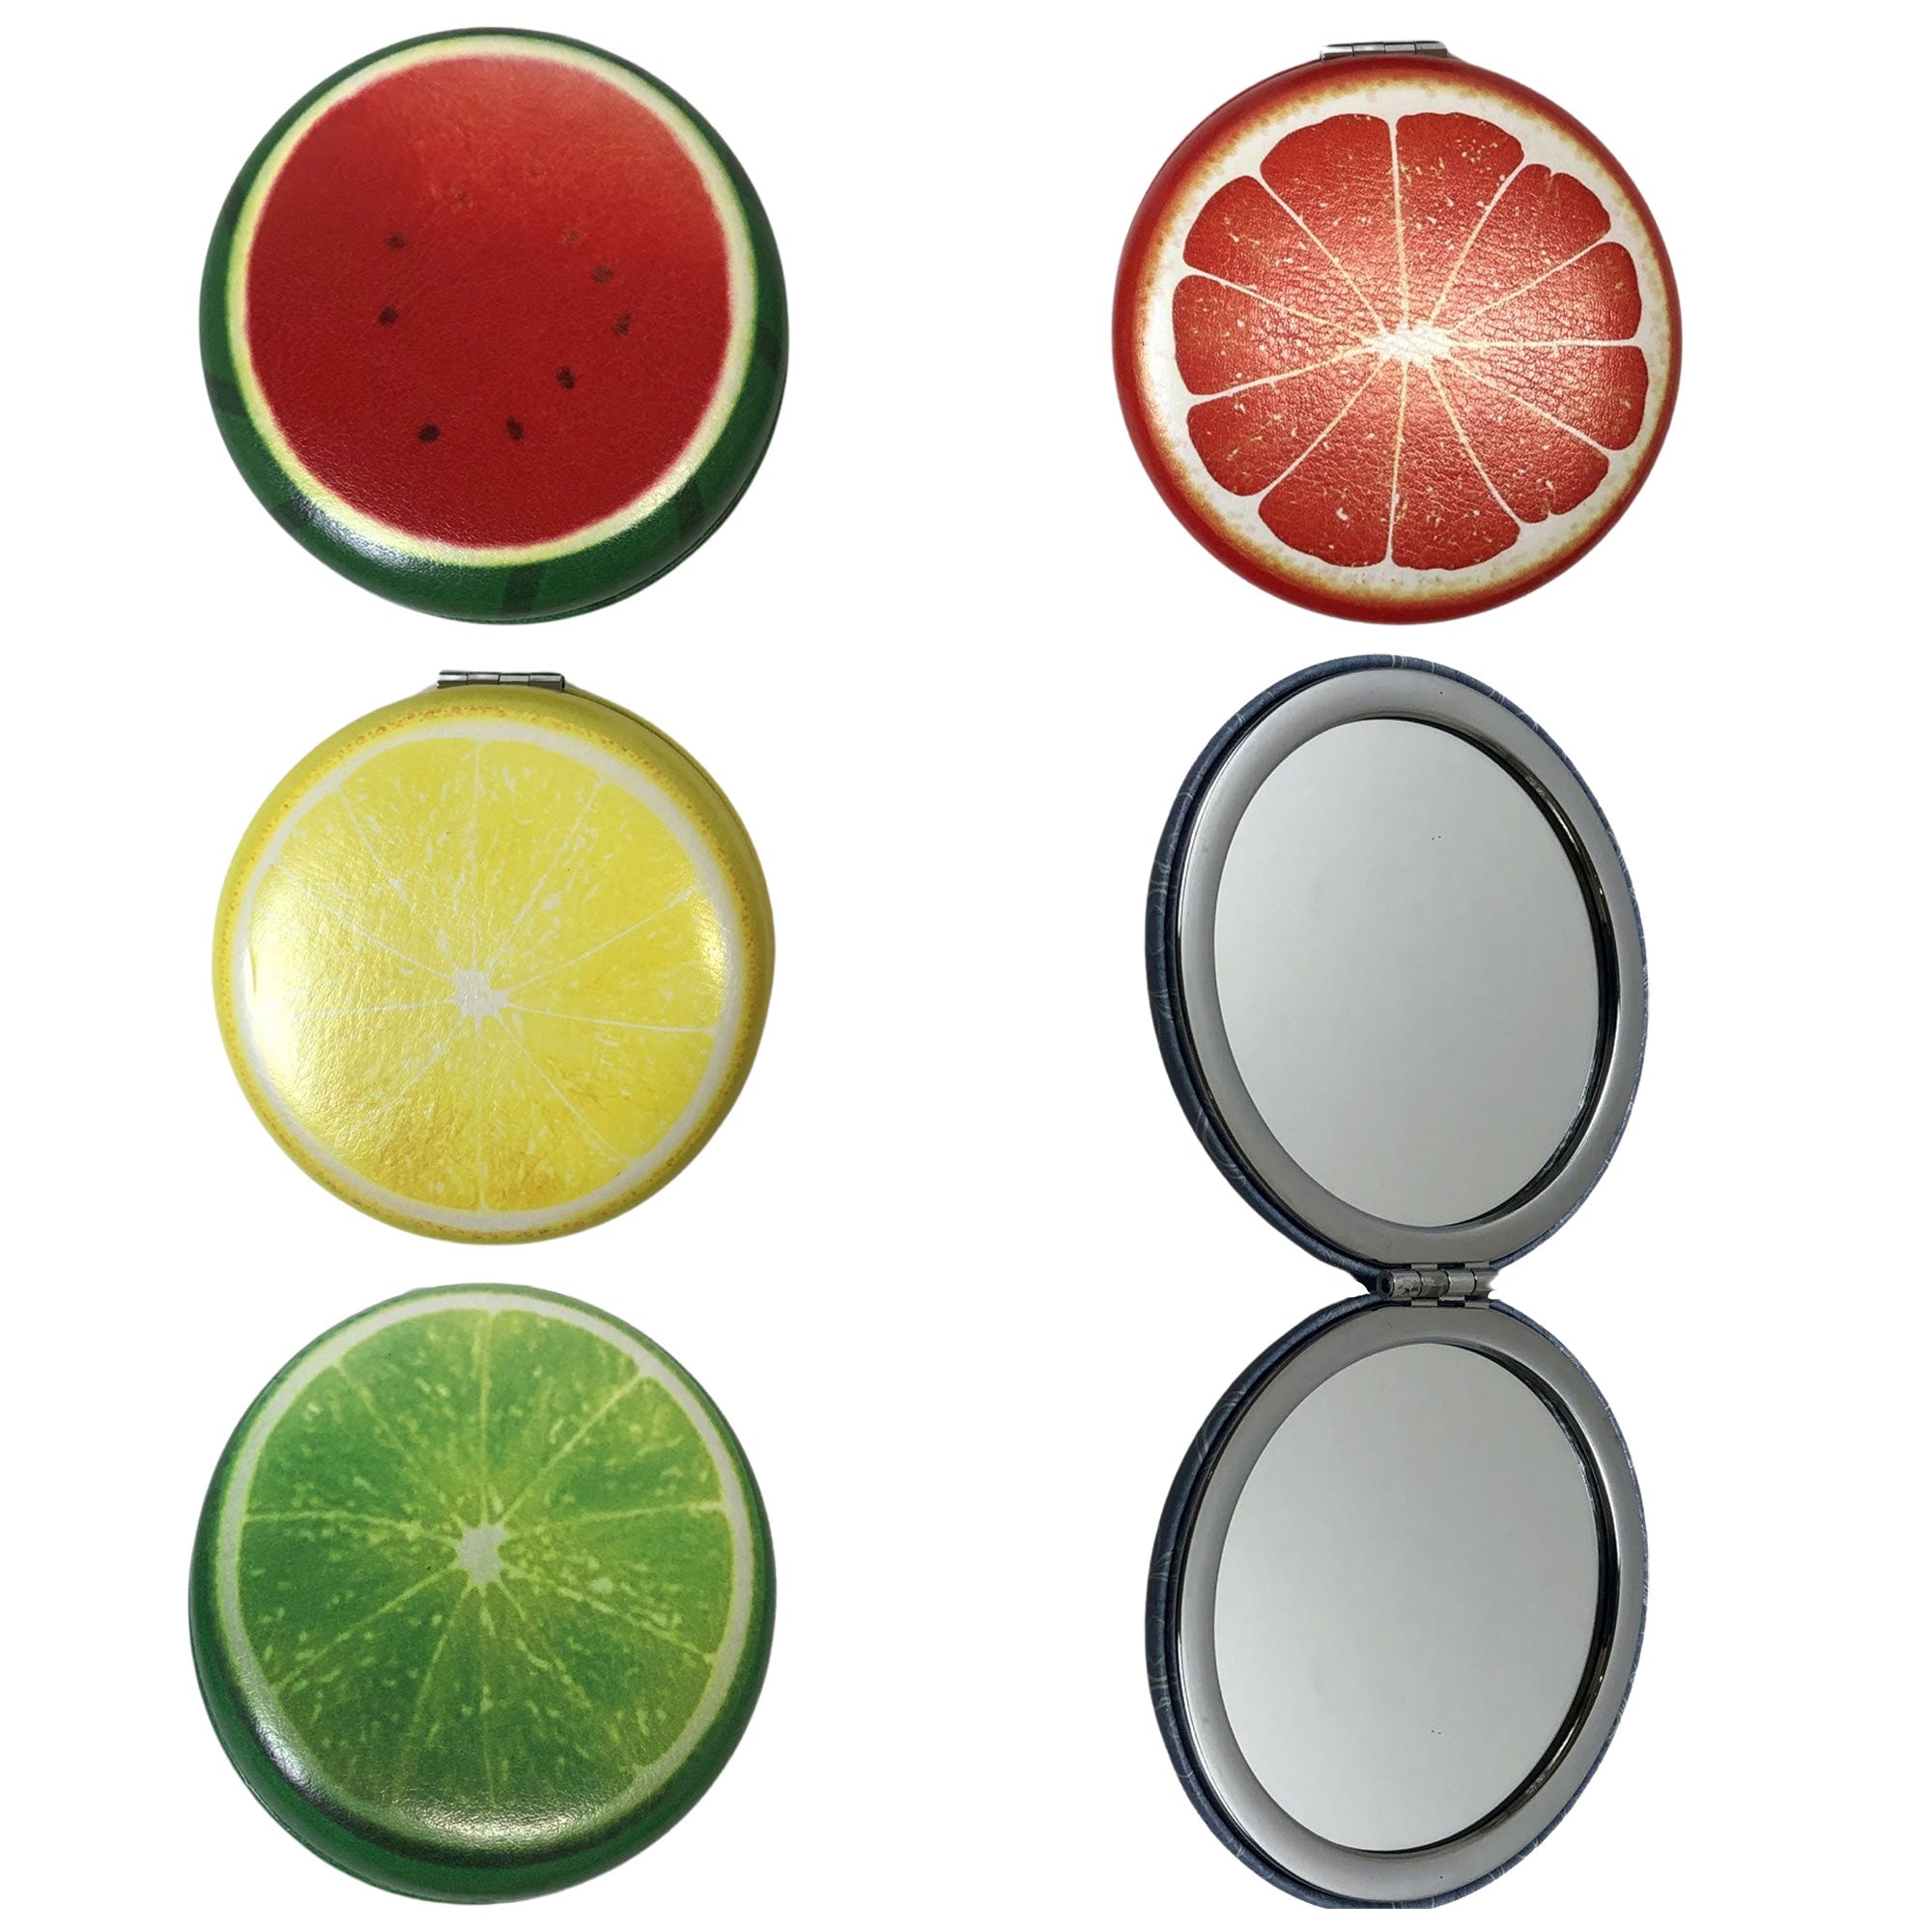 CLEARANCE COSMETIC MIRRORS FRUIT PRINTS (CASE OF 48 - $1.50 / PIECE)  Wholesale Round Cosmetic Mirrors in Assorted Prints SKU: 906-FRUIT-48